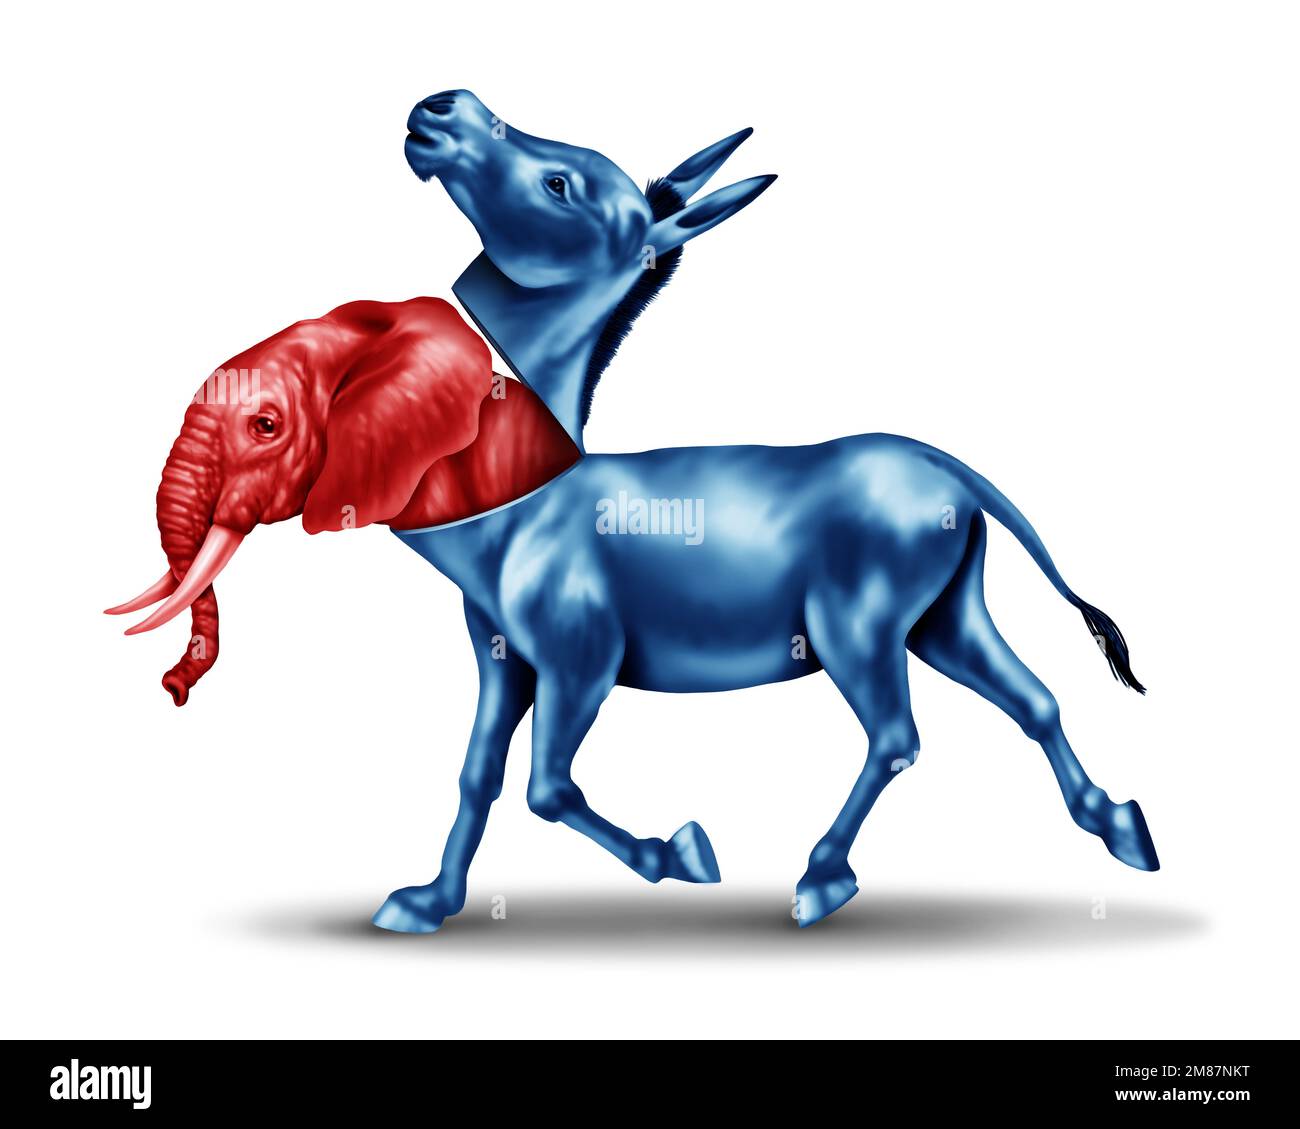 Fake Progressive or closet Liberal as a red Elephant pretending or masquerading as a Blue Donkey in an American election campaign as a symbol Stock Photo